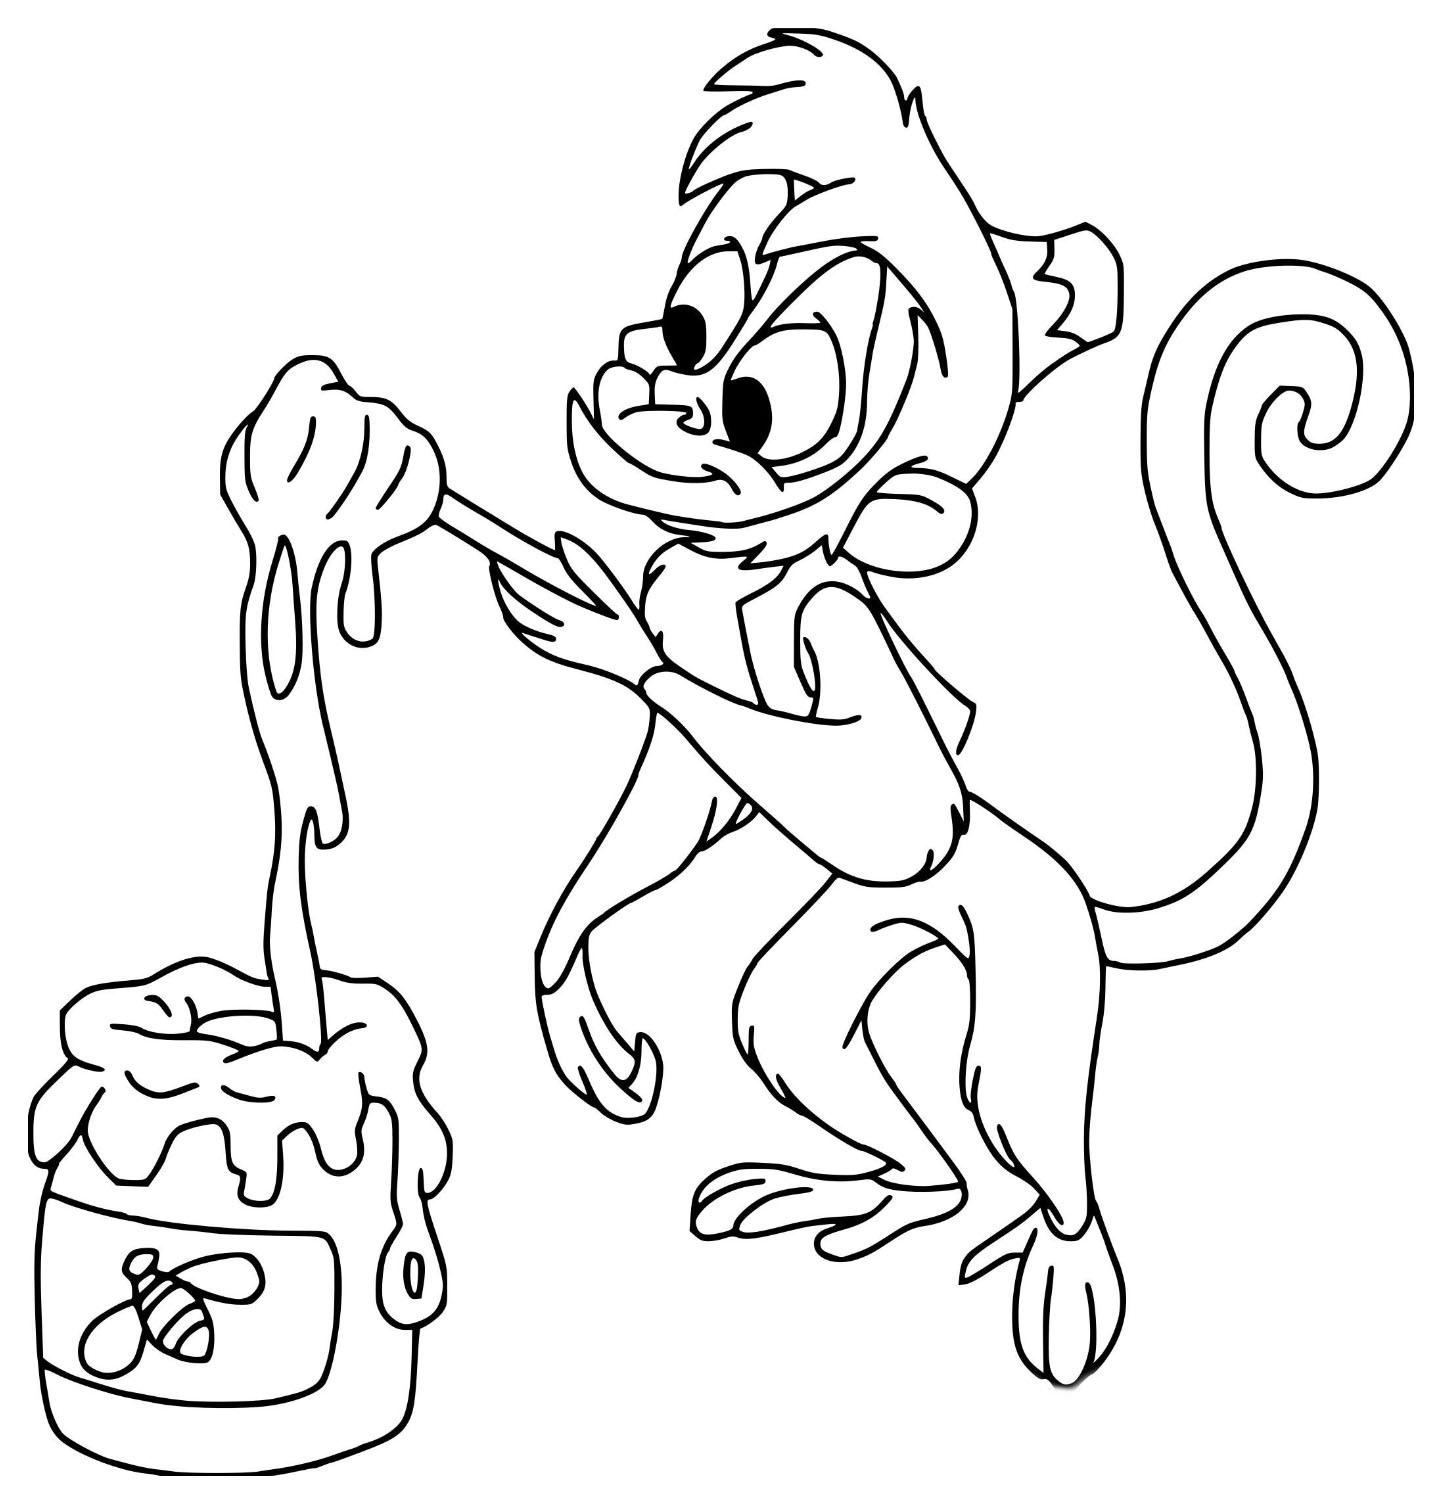 Abu the little monkey of Aladdin to color